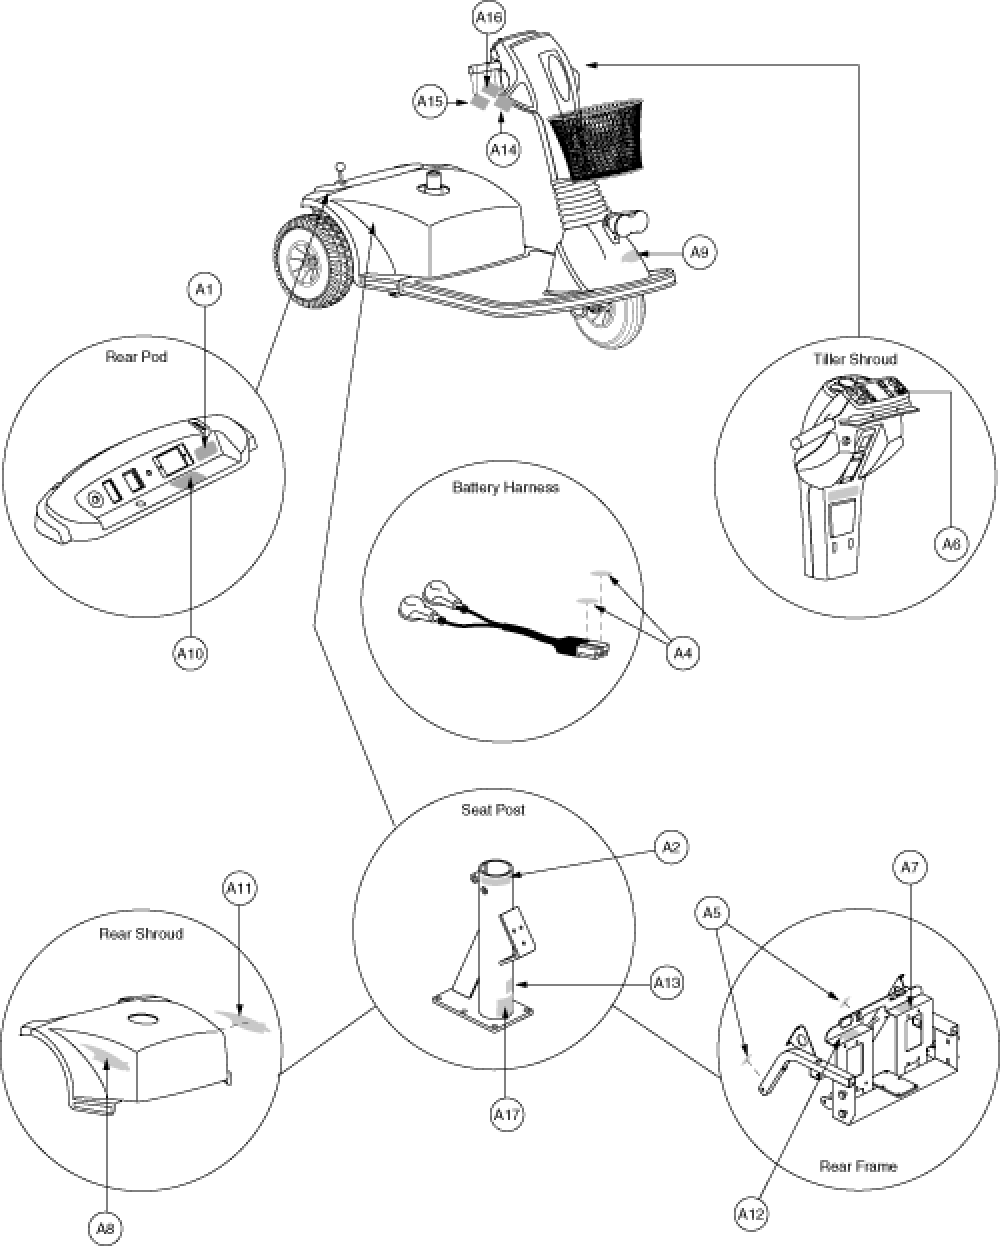 Decal Package parts diagram